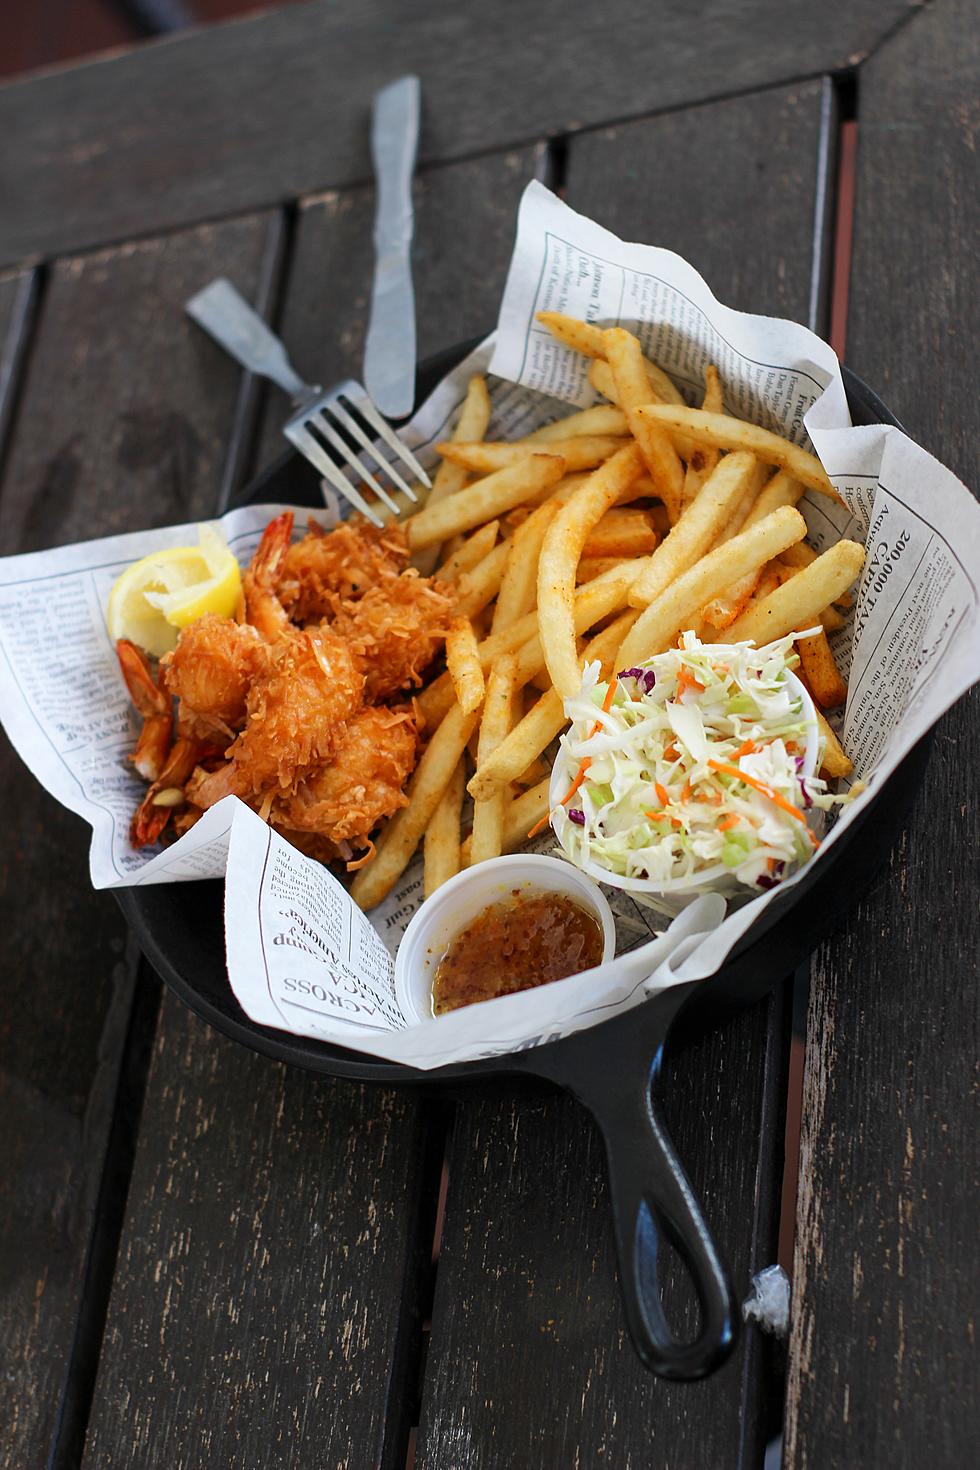 [GALLERY] Where Are The Best Fish Fries In The Southern Tier?